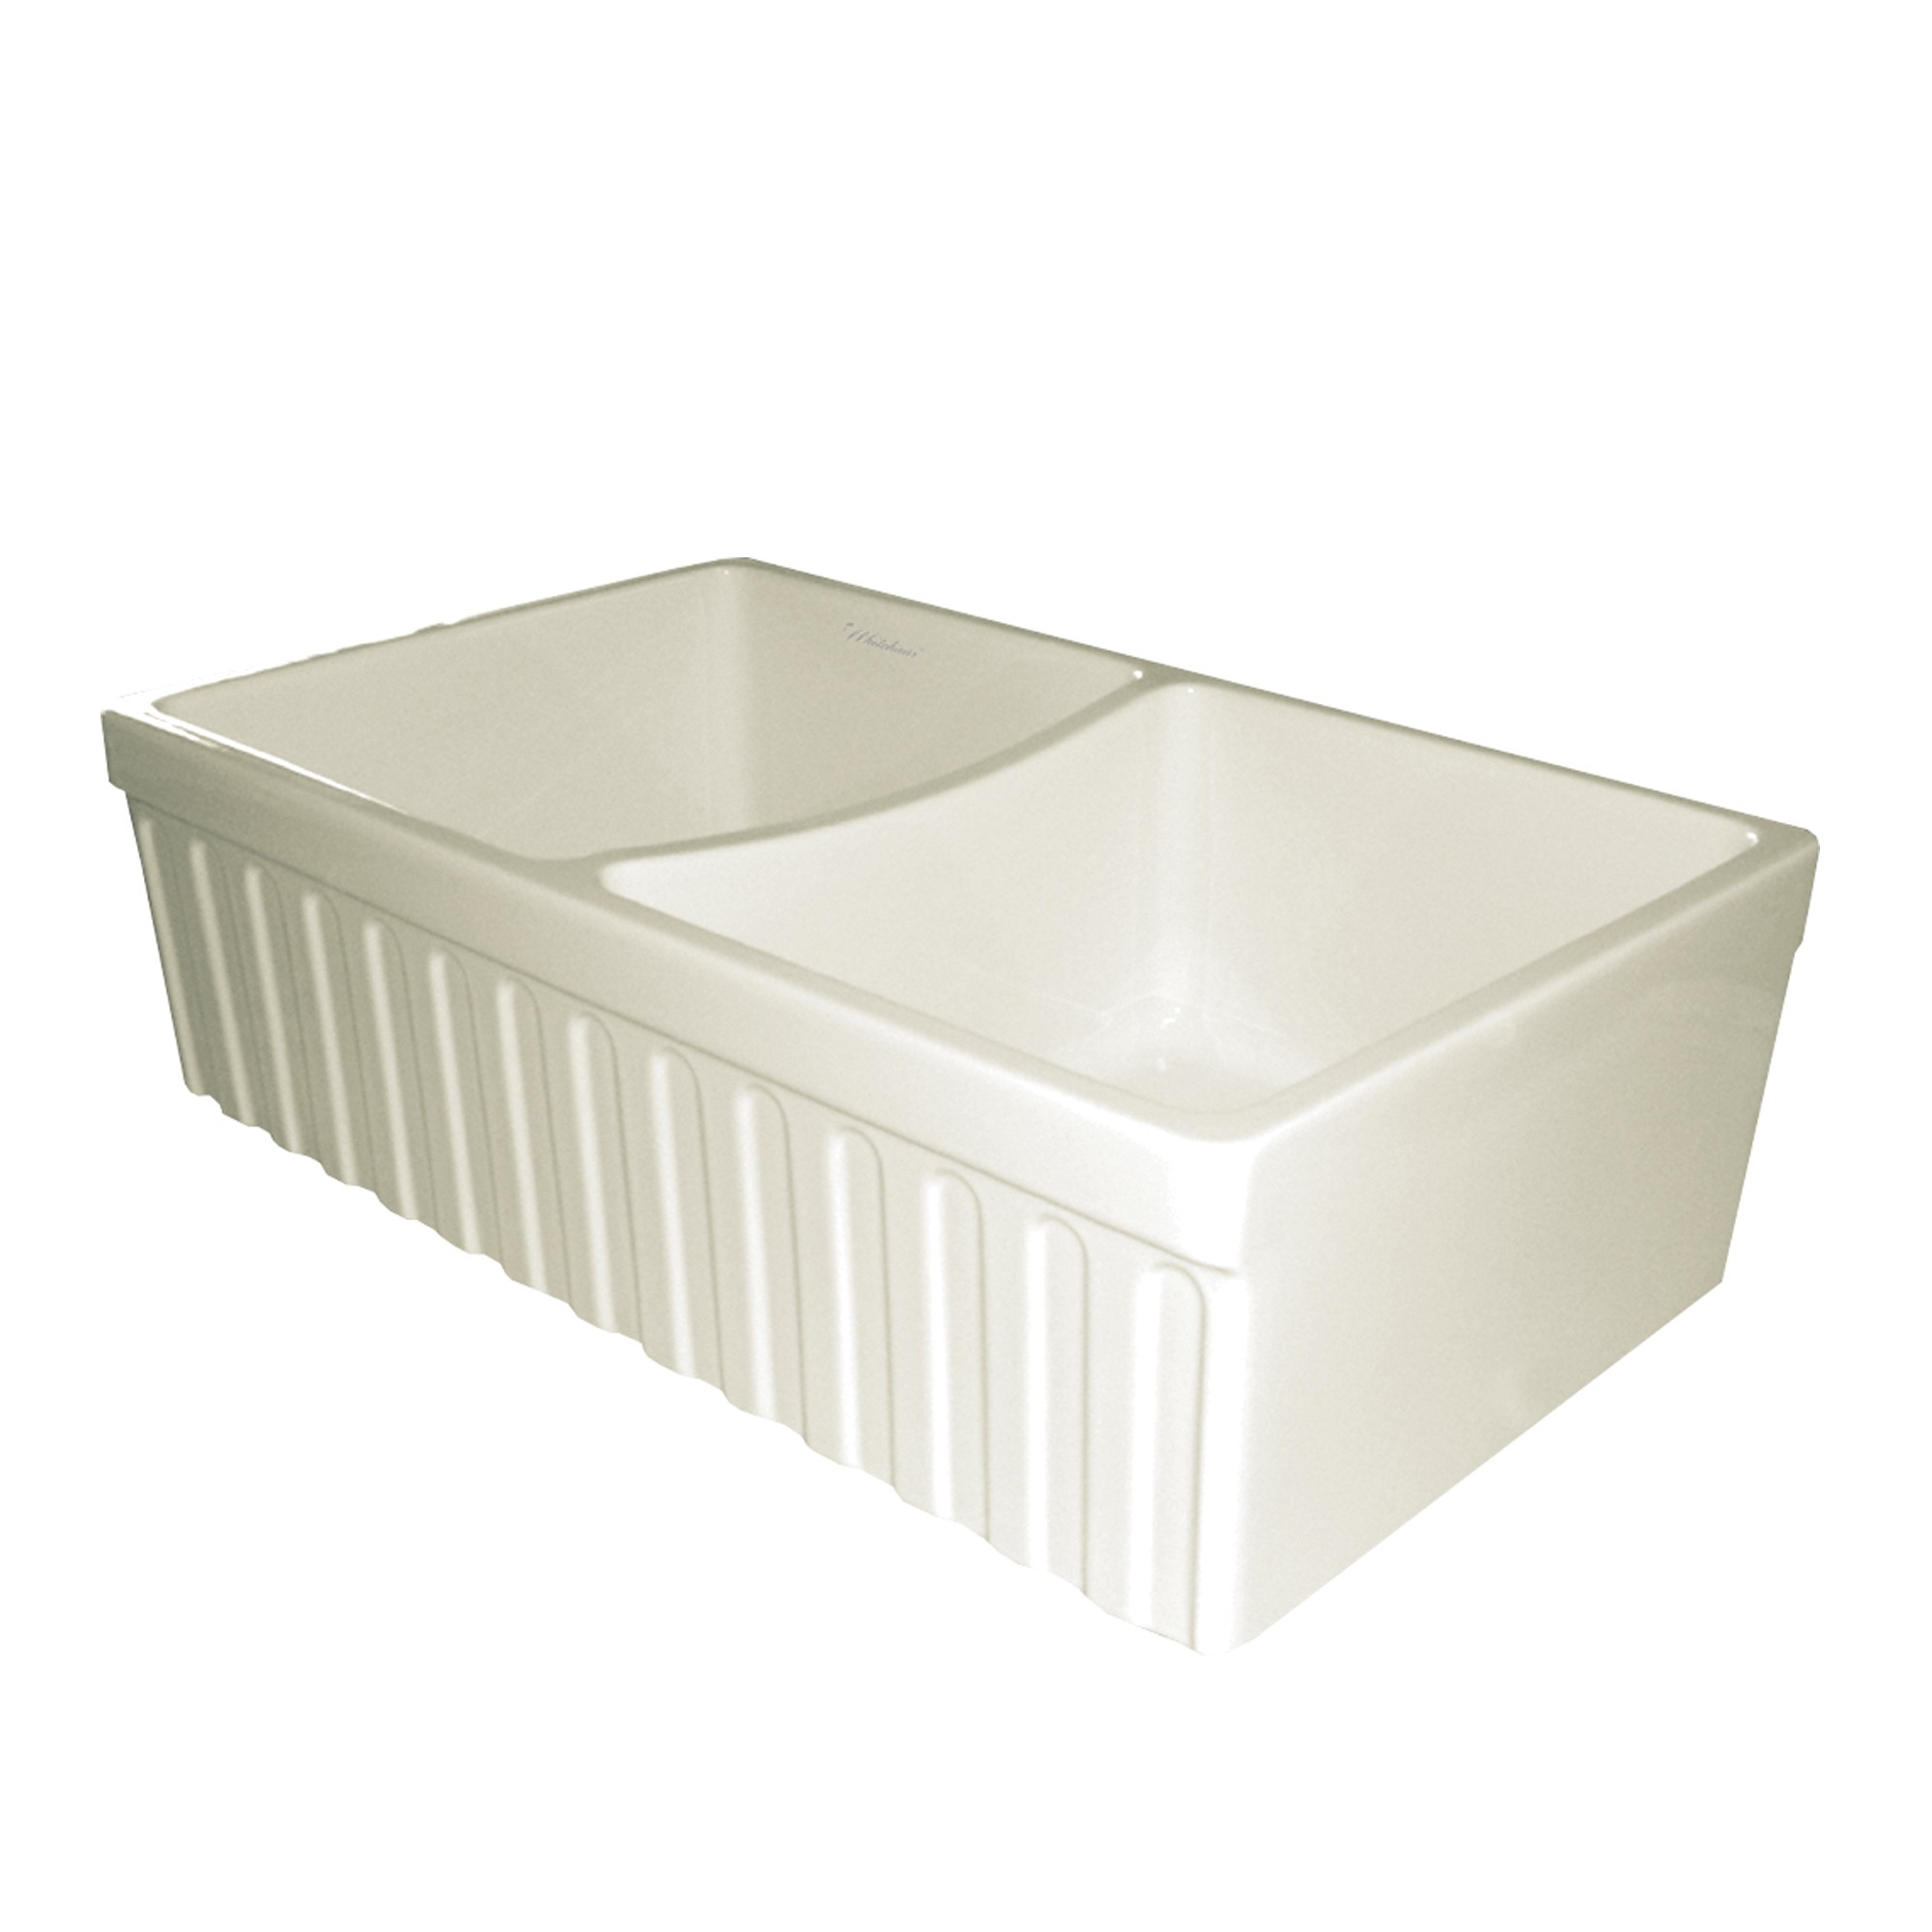 Farmhaus Fireclay Quatro Alcove Reversible Double Bowl Sink with a Fluted Front Apron and 2" Lip on One Side and 2 +" Lip on the